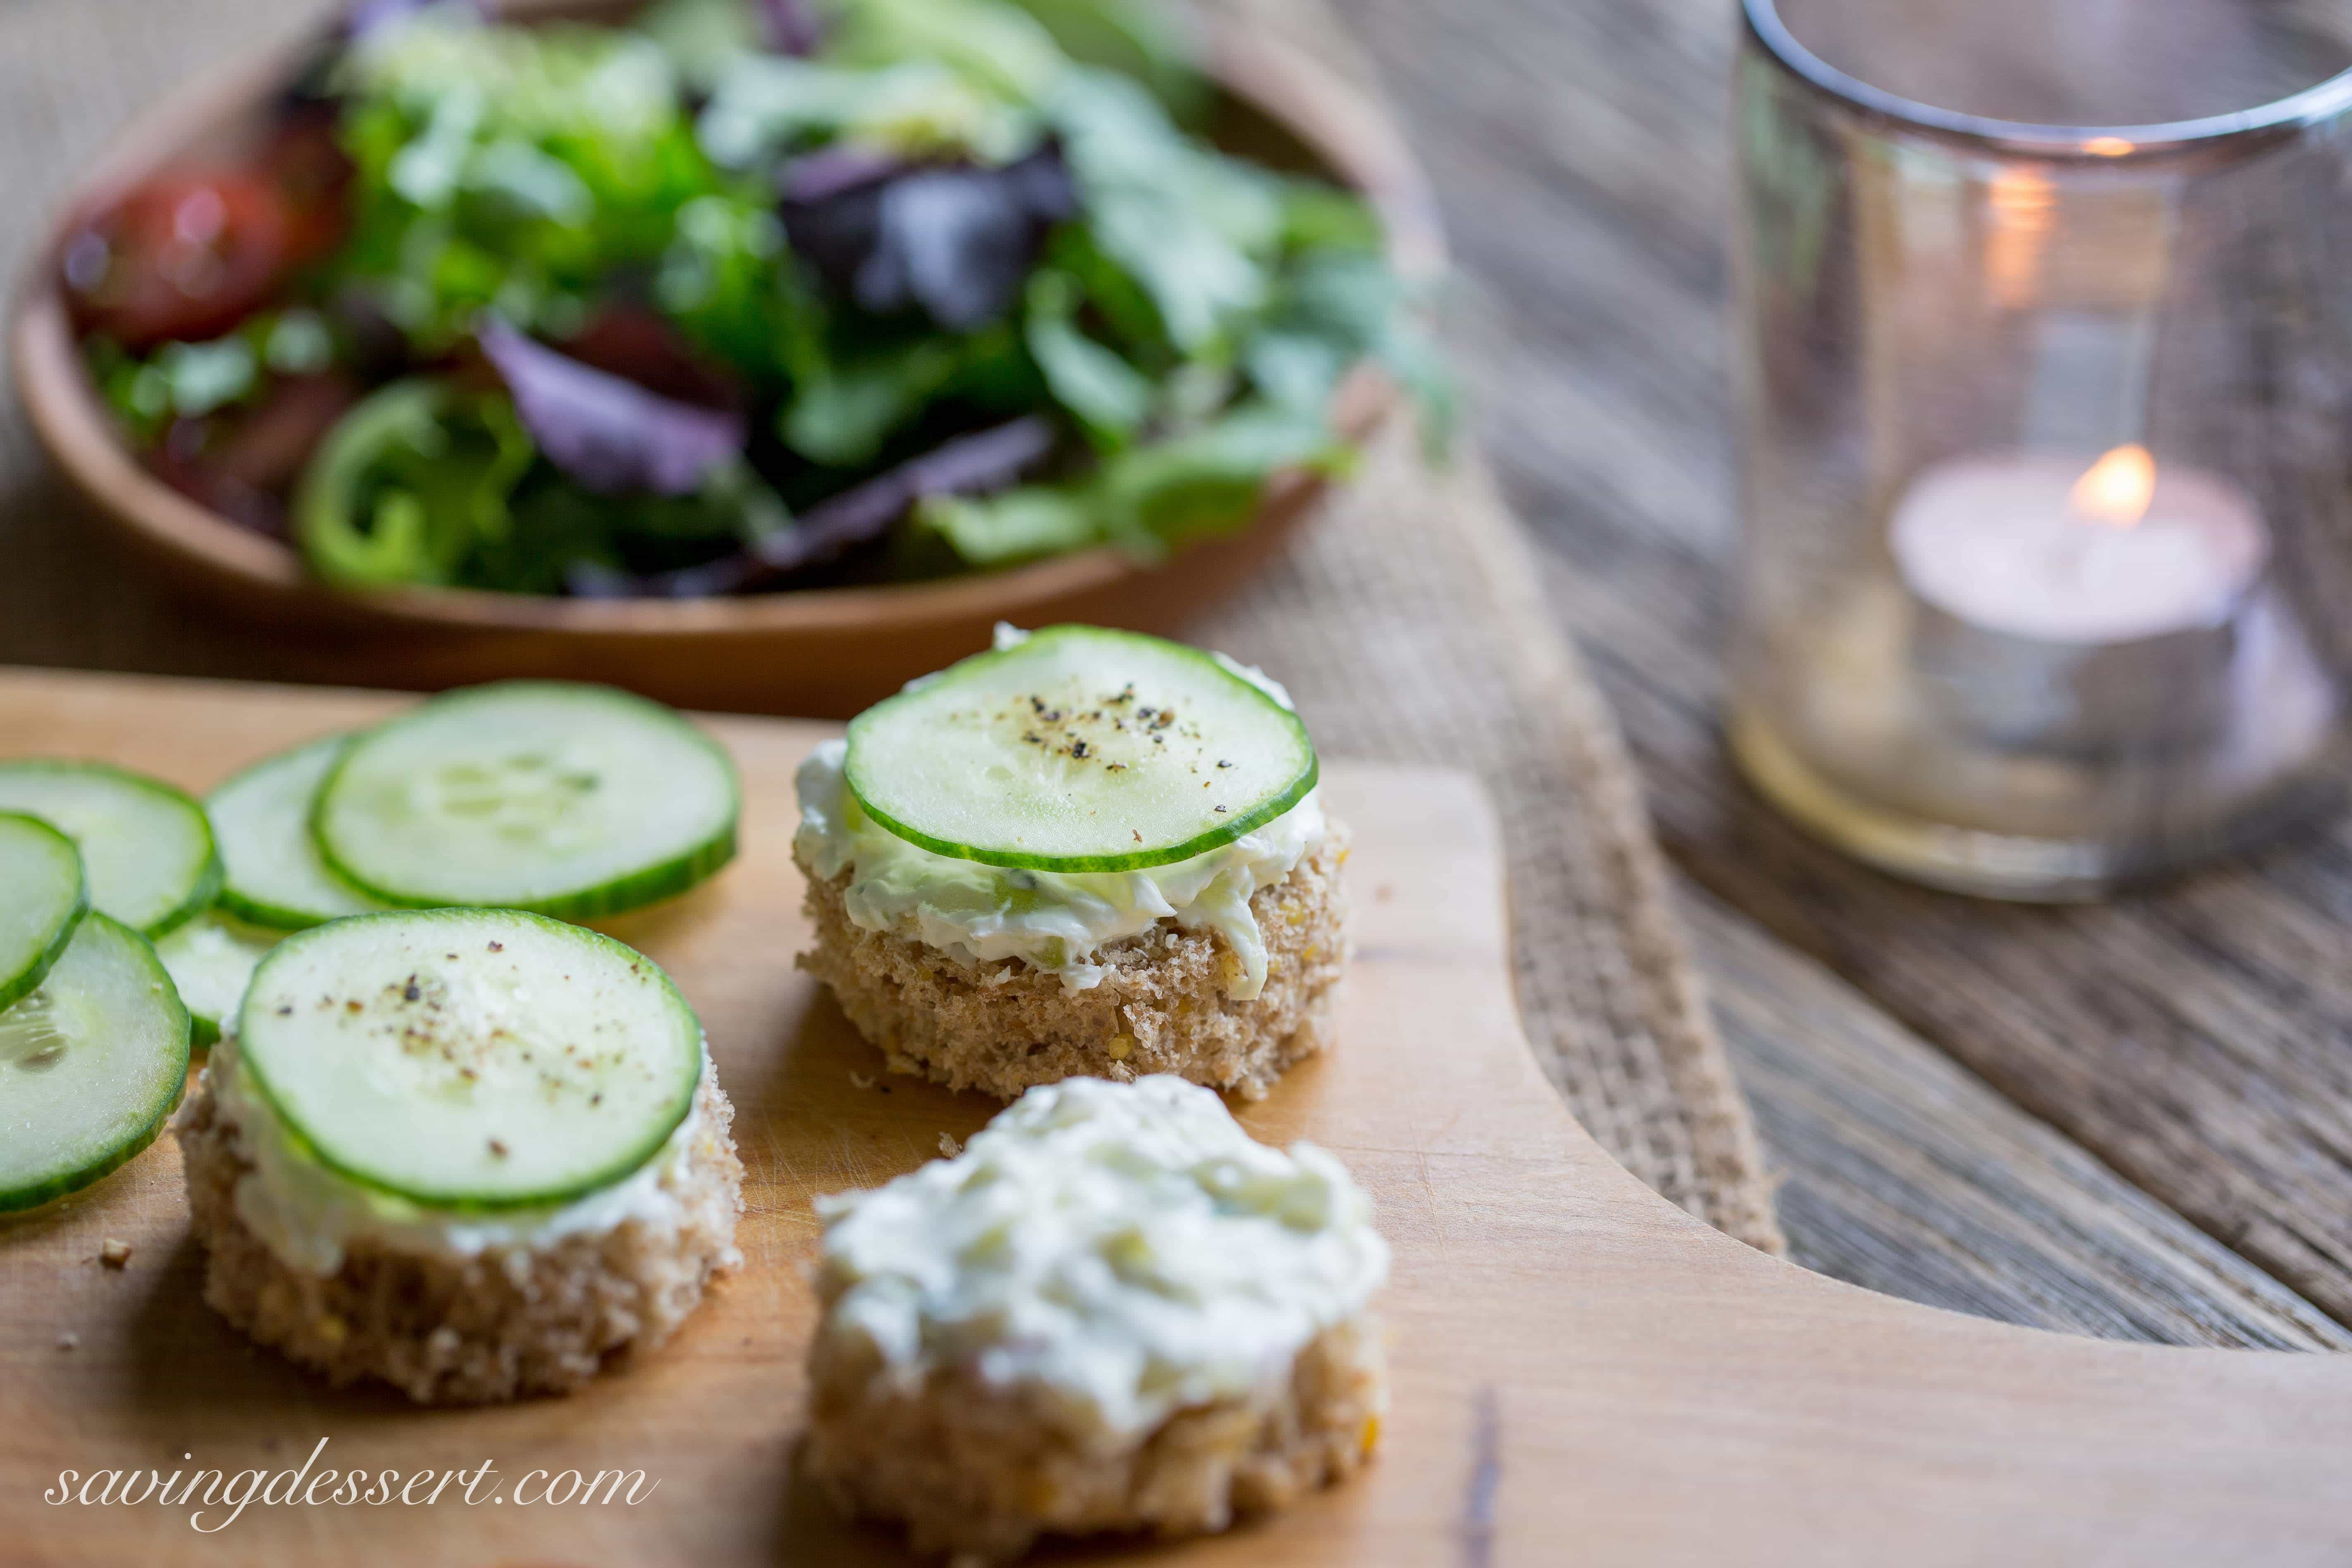 Smoked Salmon Appetizer With Cucumber
 Smoked Salmon & Cucumber Cream Cheese Appetizers Saving